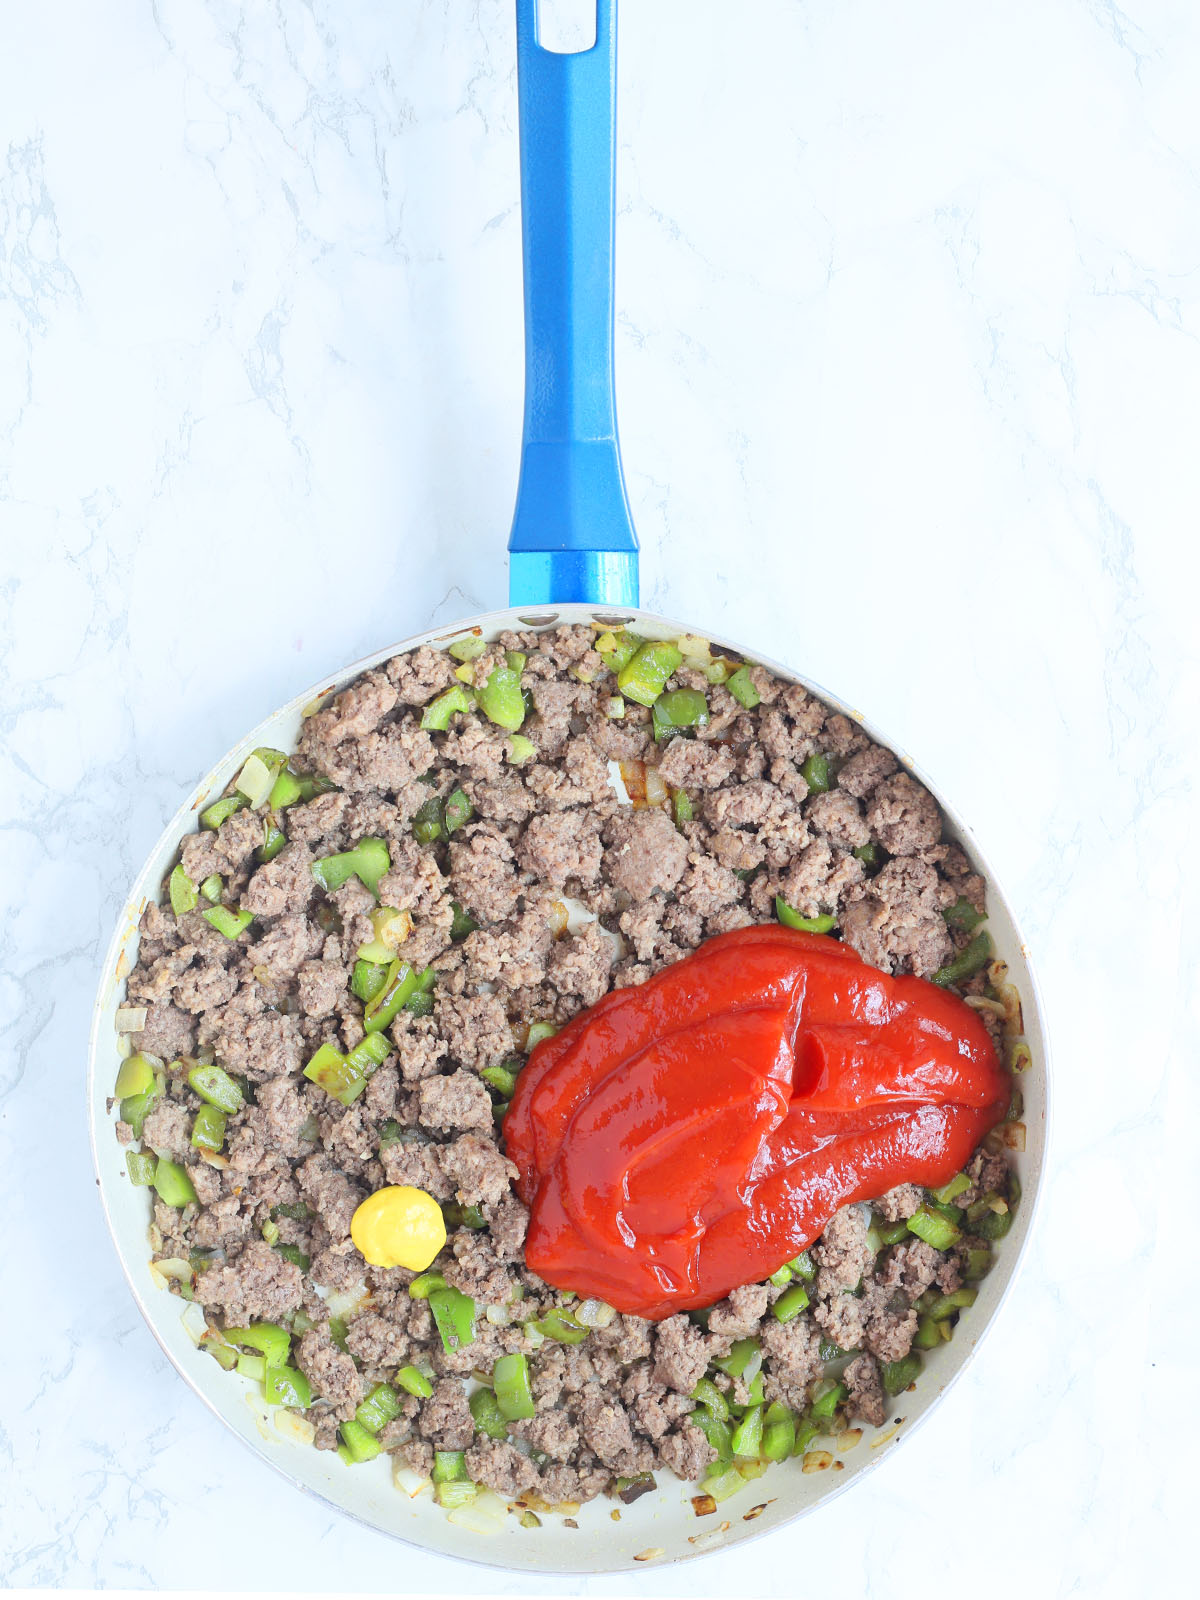 ground beef and vegetables with ketchup, mustard and Worcestershire sauce